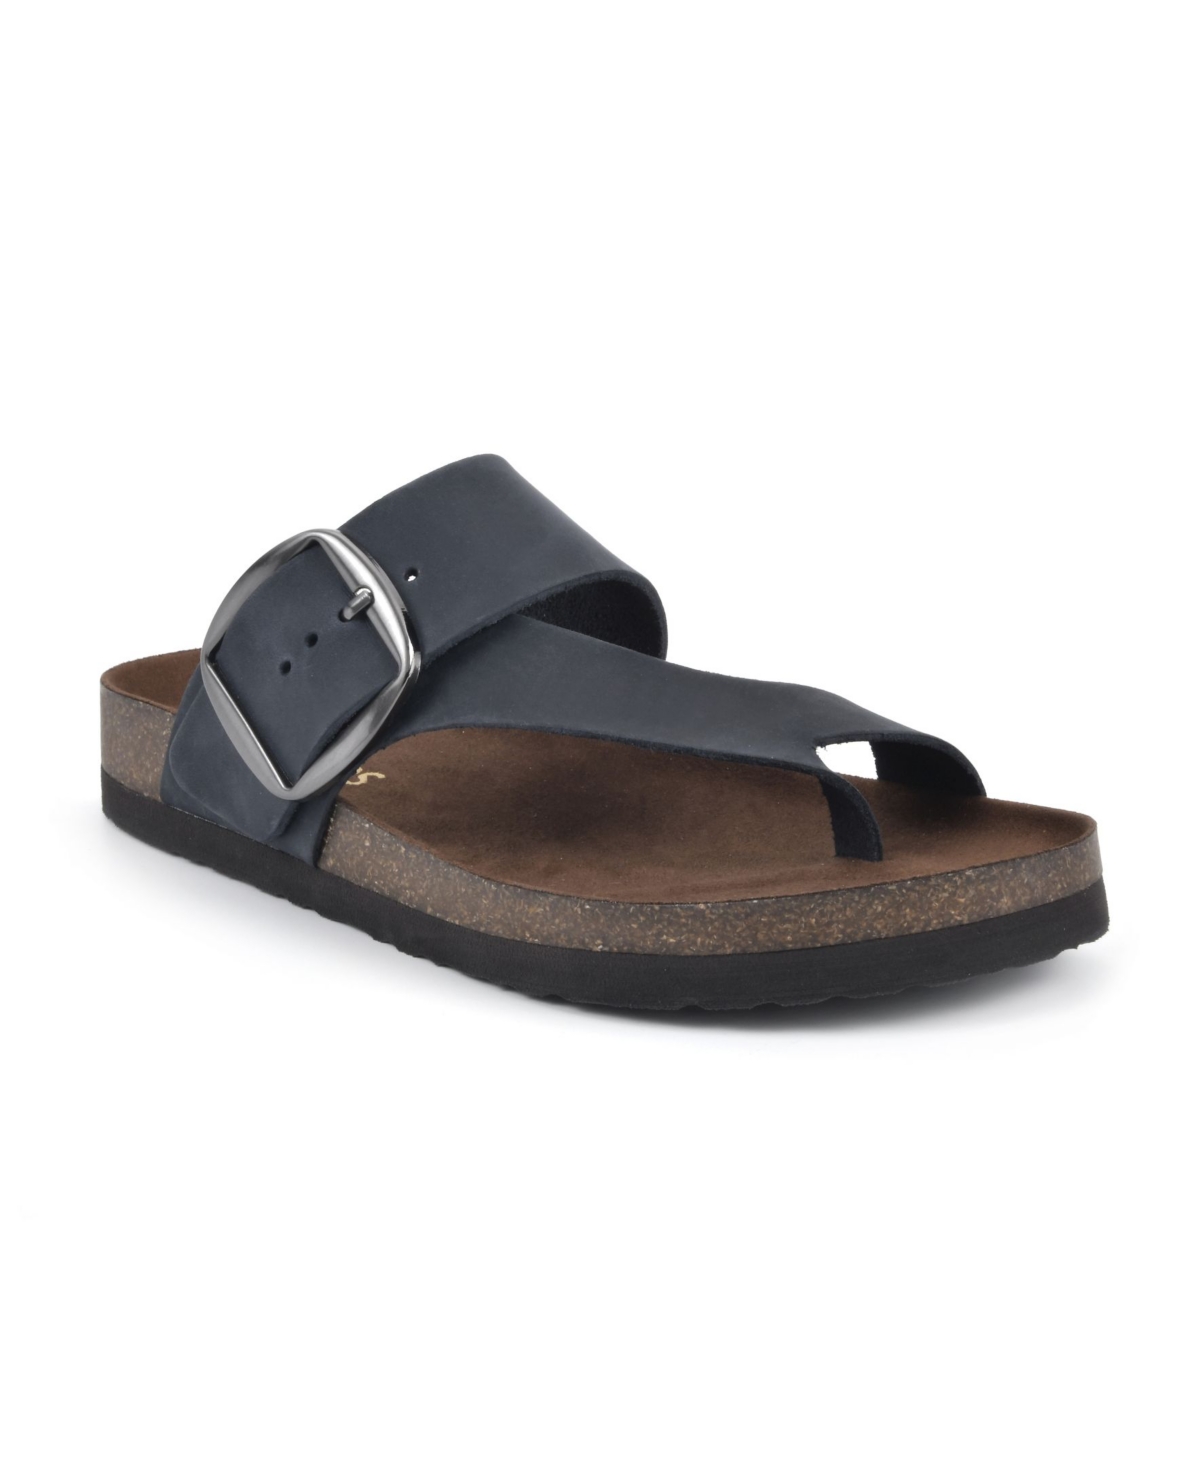 Women's Harley Footbed Sandals - Navy, Leather